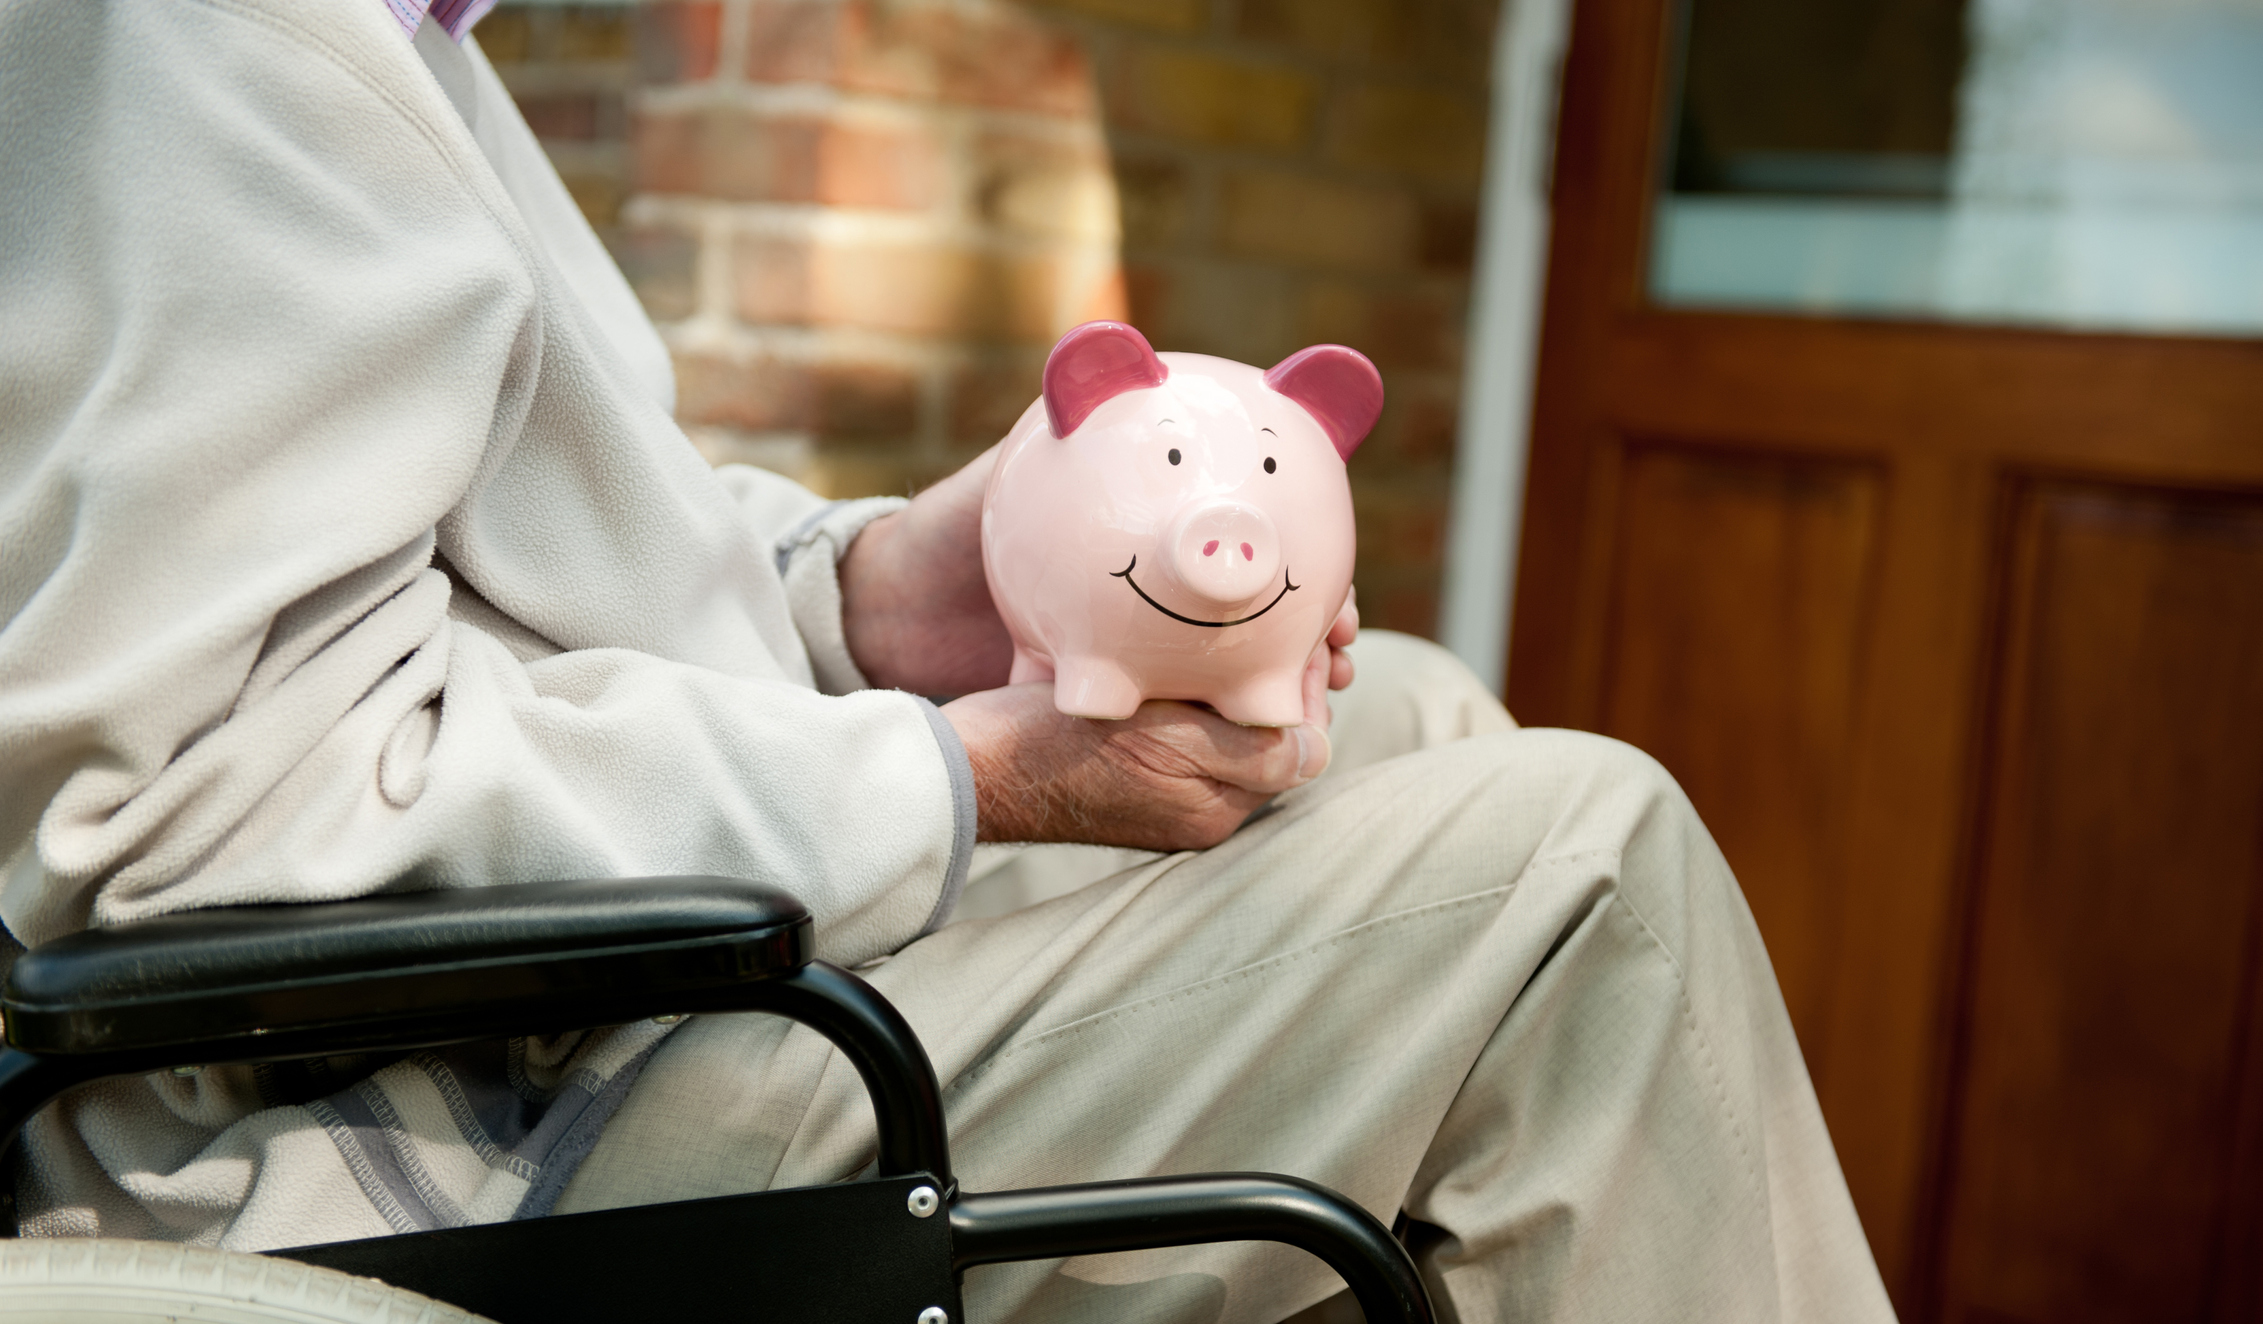 PIC - wheelchair user with piggy bank